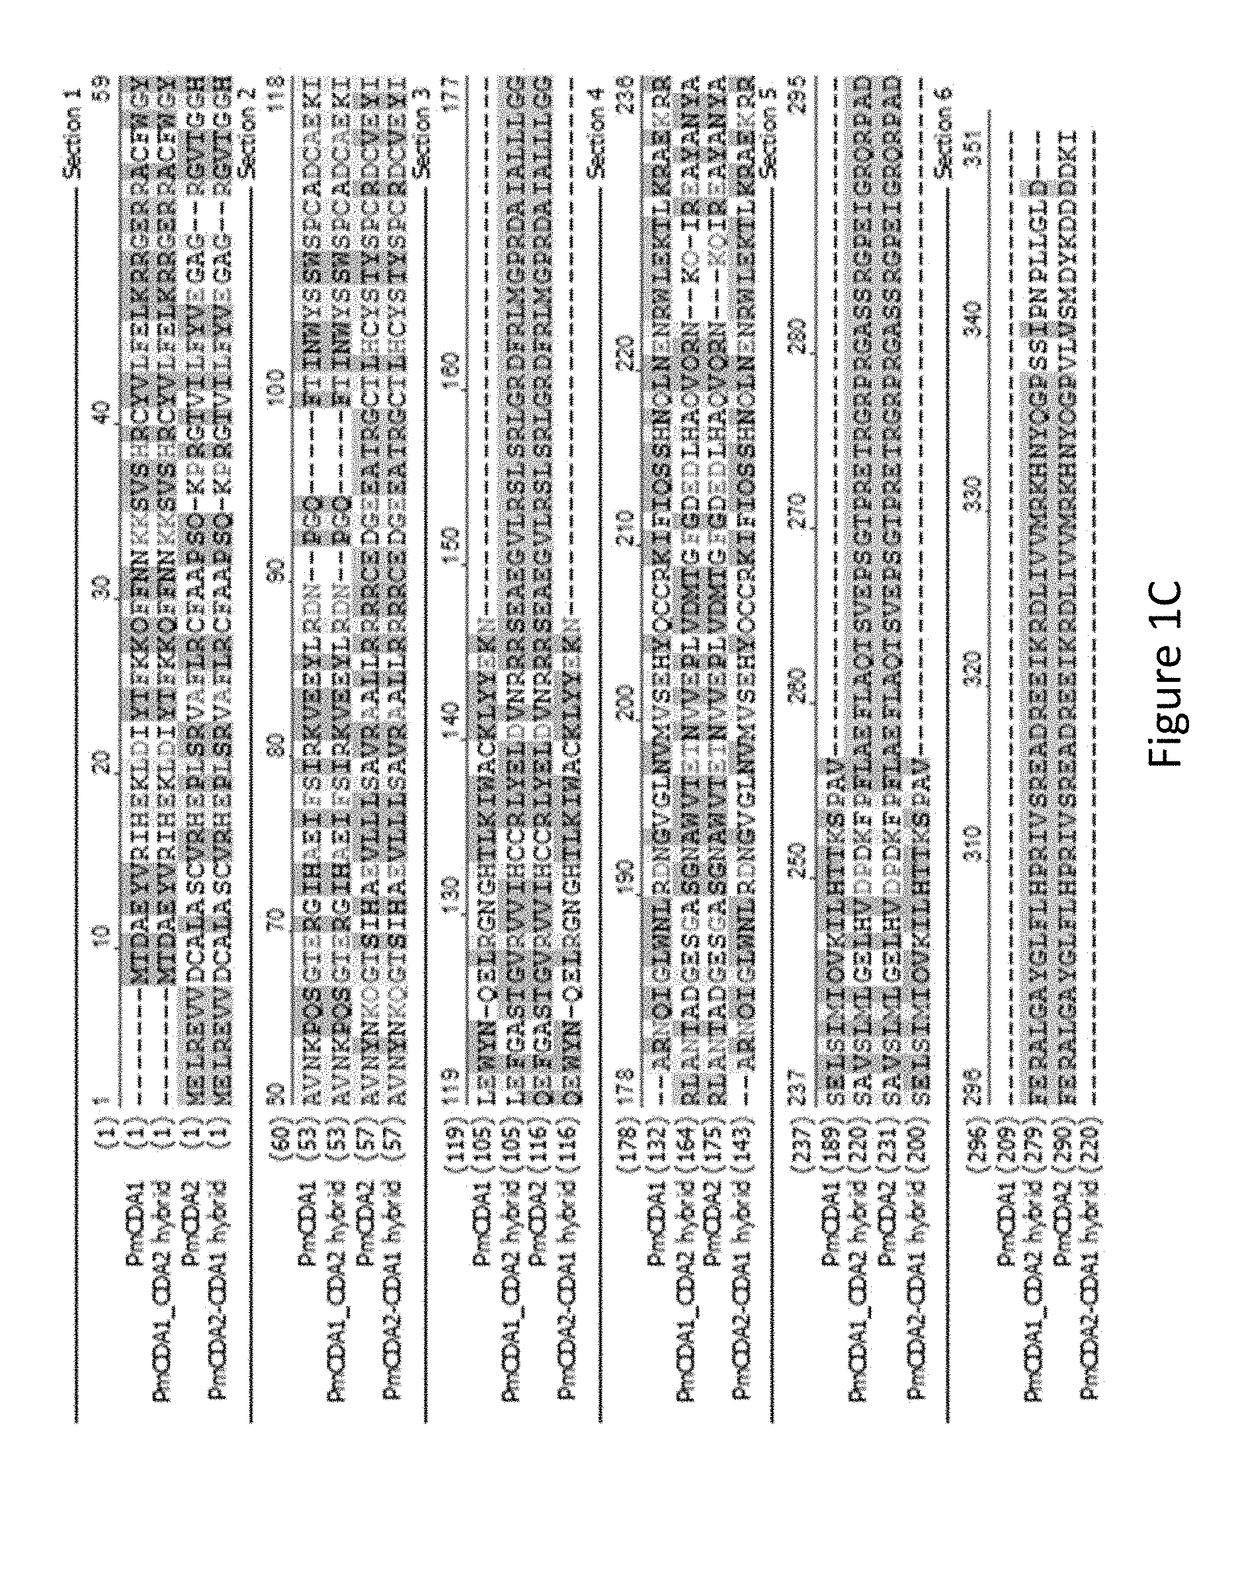 Composition and method for diversifying polypeptide libraries